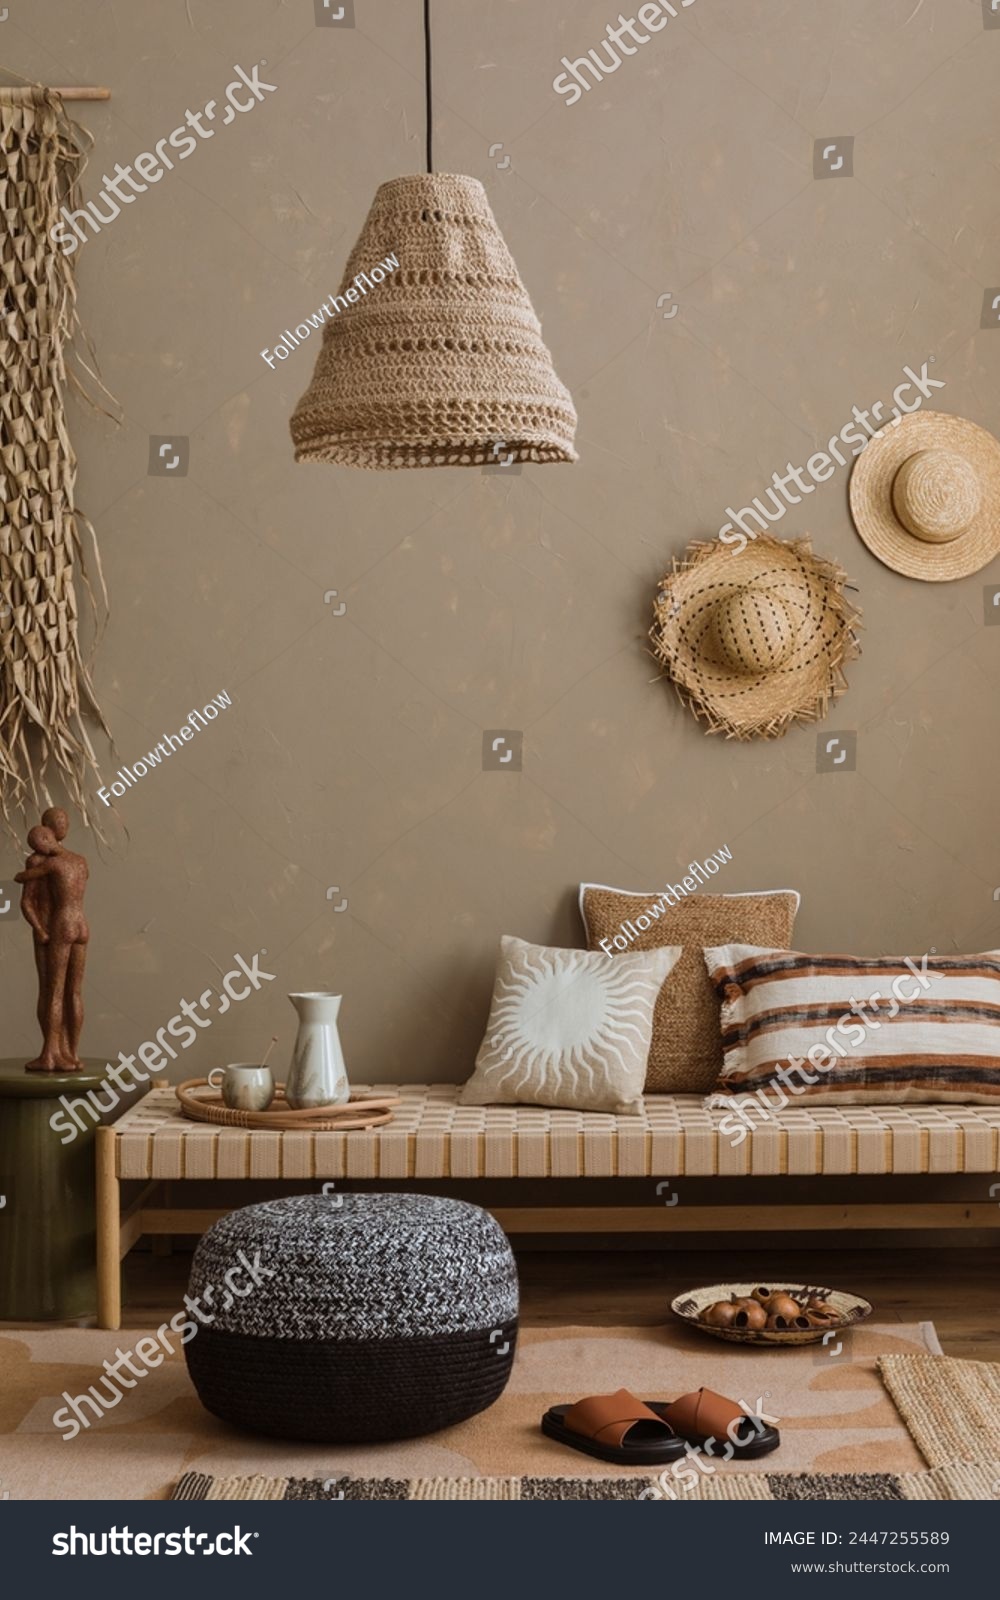 Stylish composition of boho ethno living room with daybed, pillows, hanging decoration, carpet, basket, beige accessories. Home decor. Template.	
 #2447255589